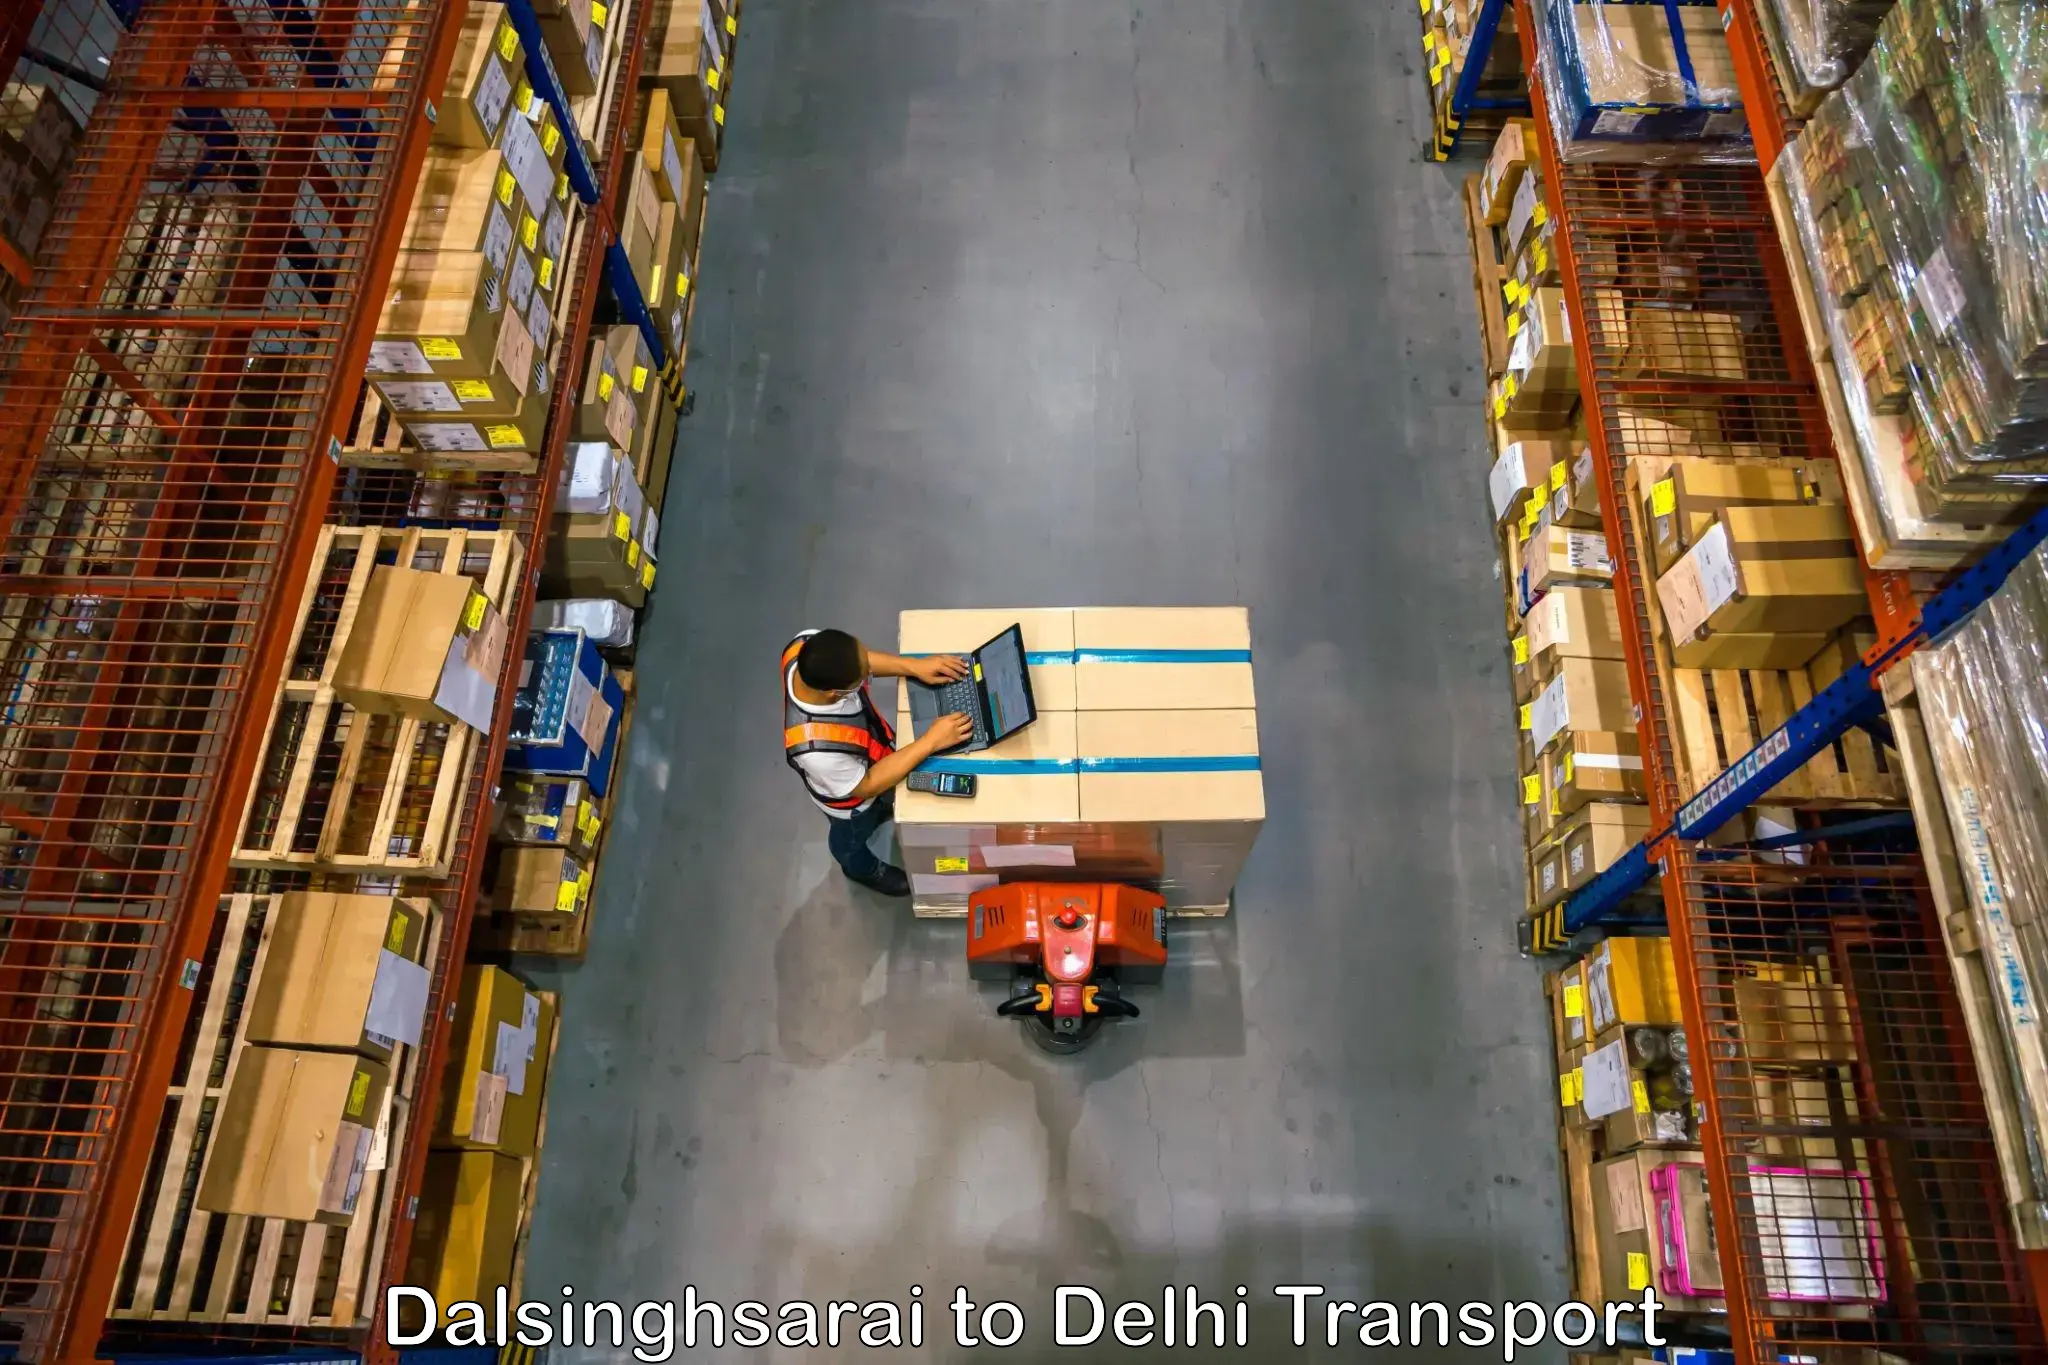 Goods delivery service Dalsinghsarai to NCR